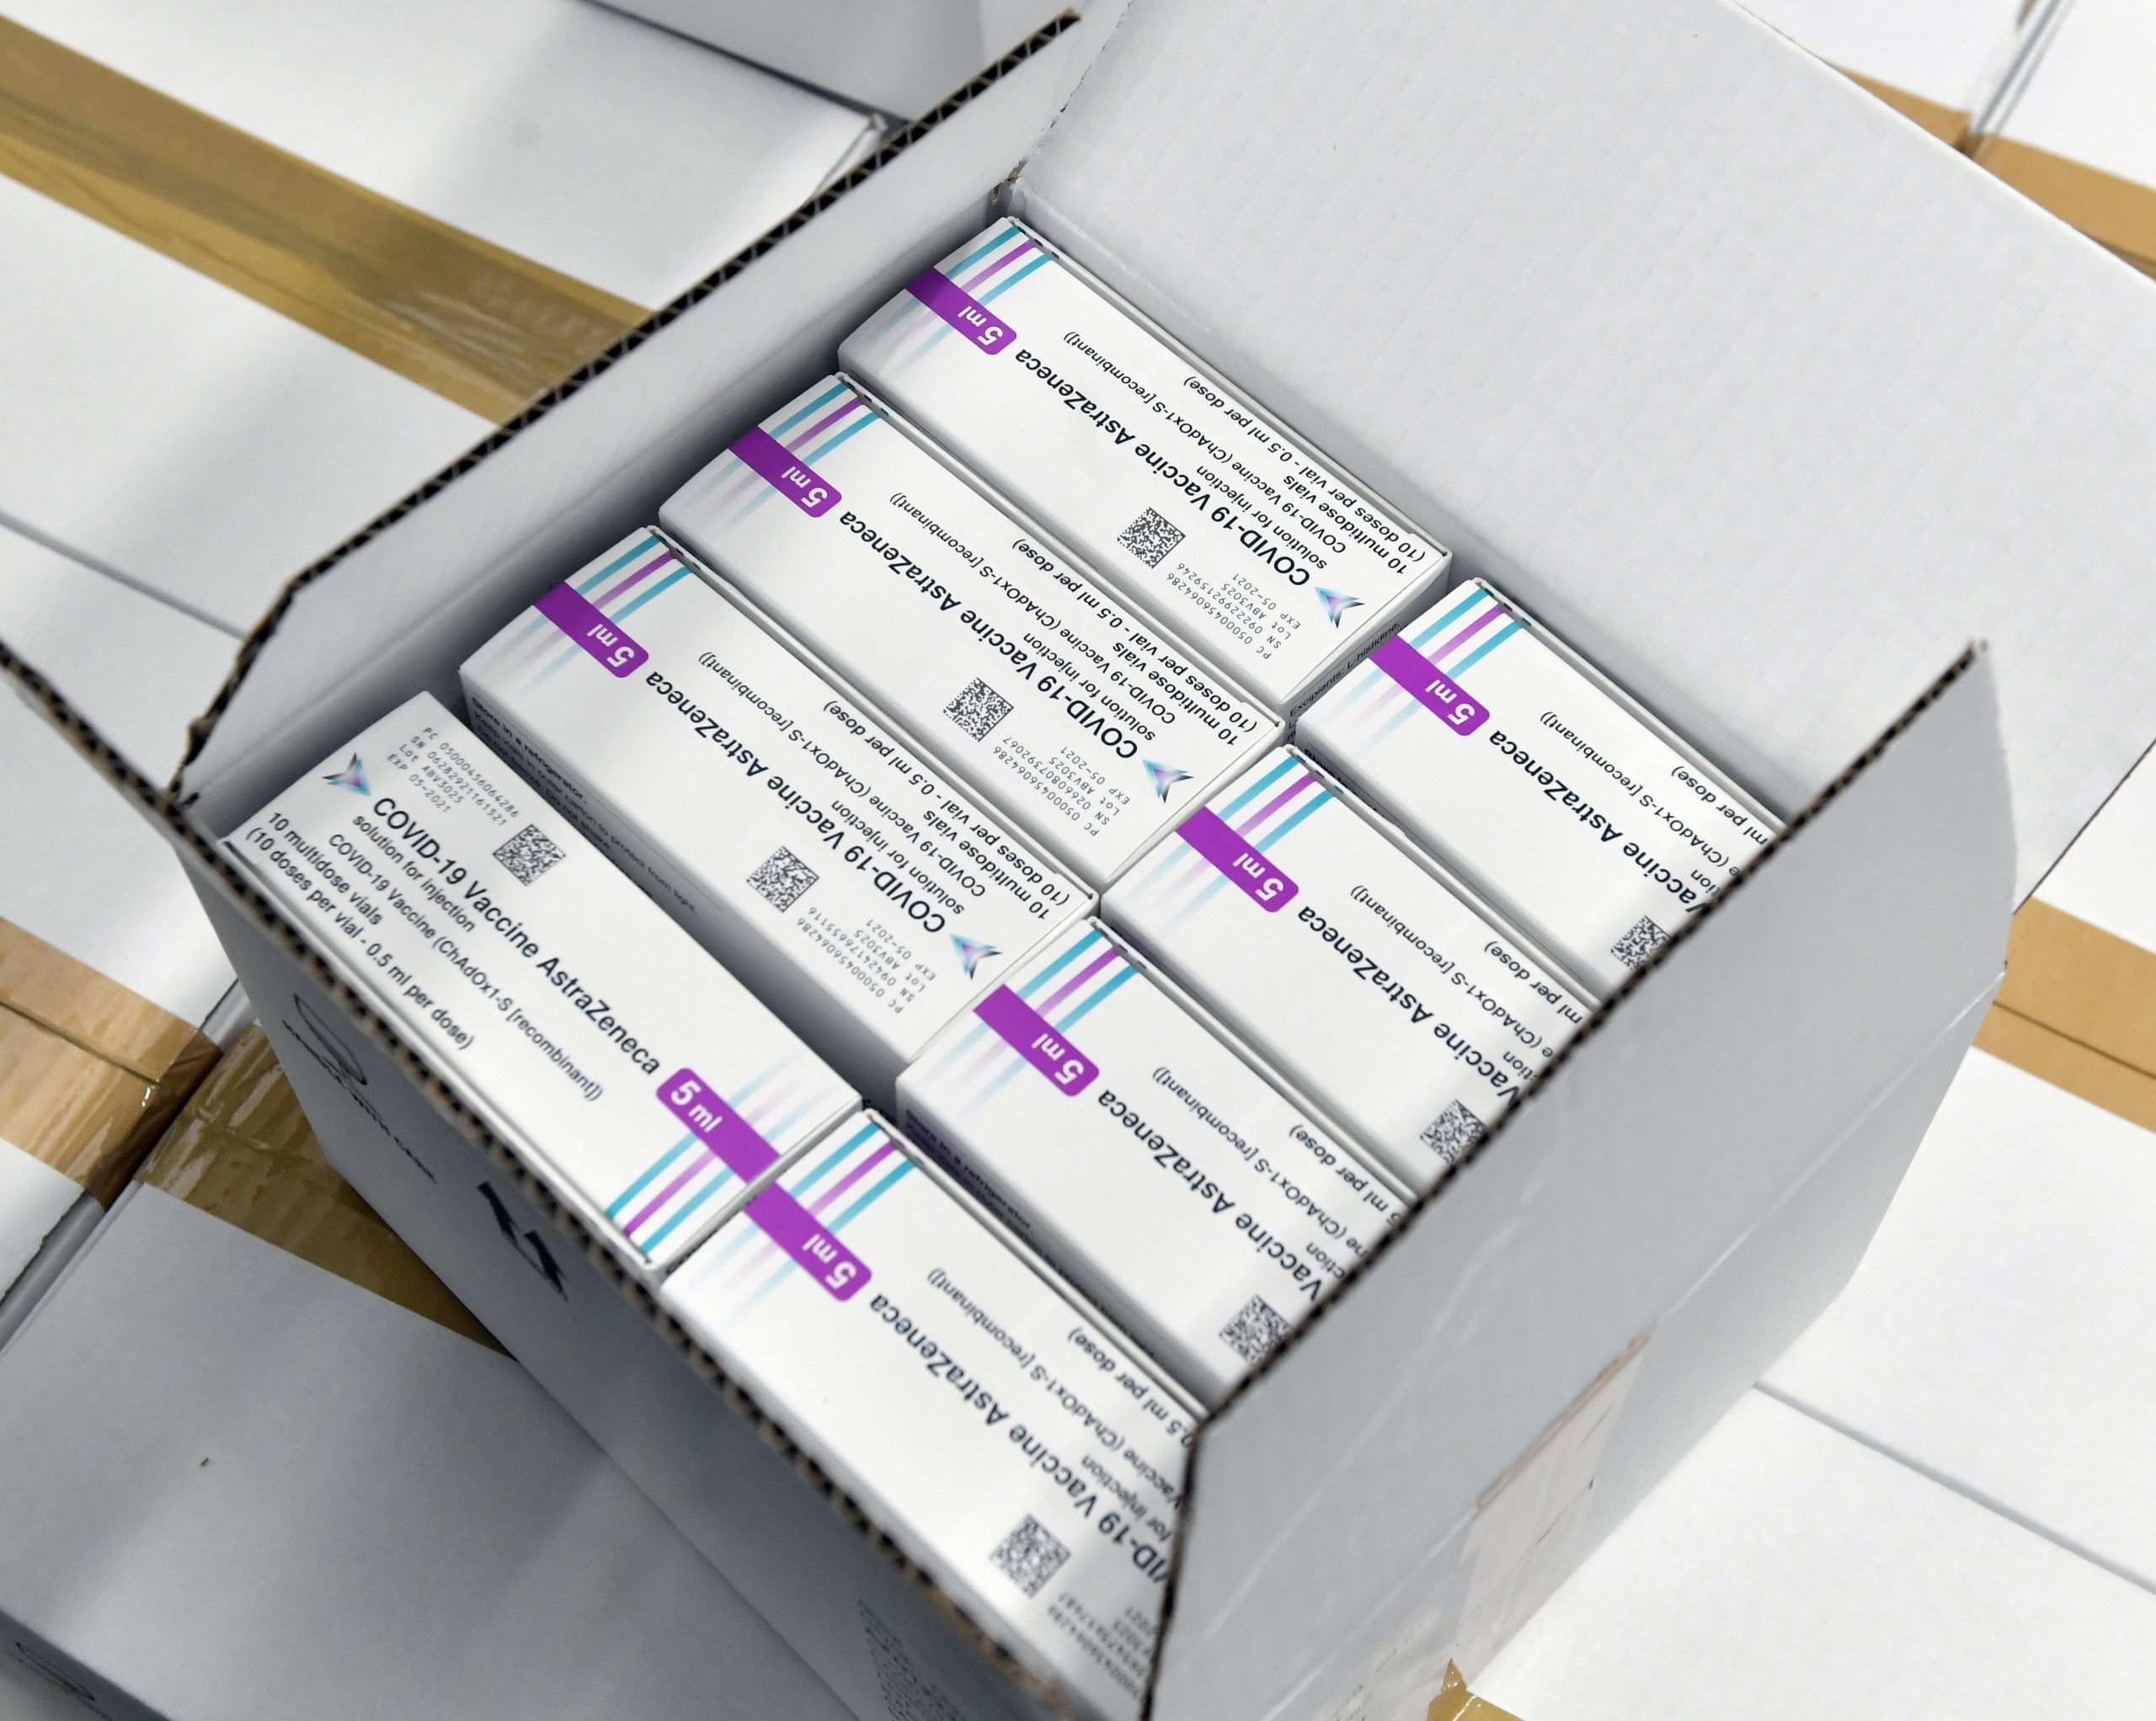 First Shipment of AstraZeneca Vaccine Arrives in Hungary